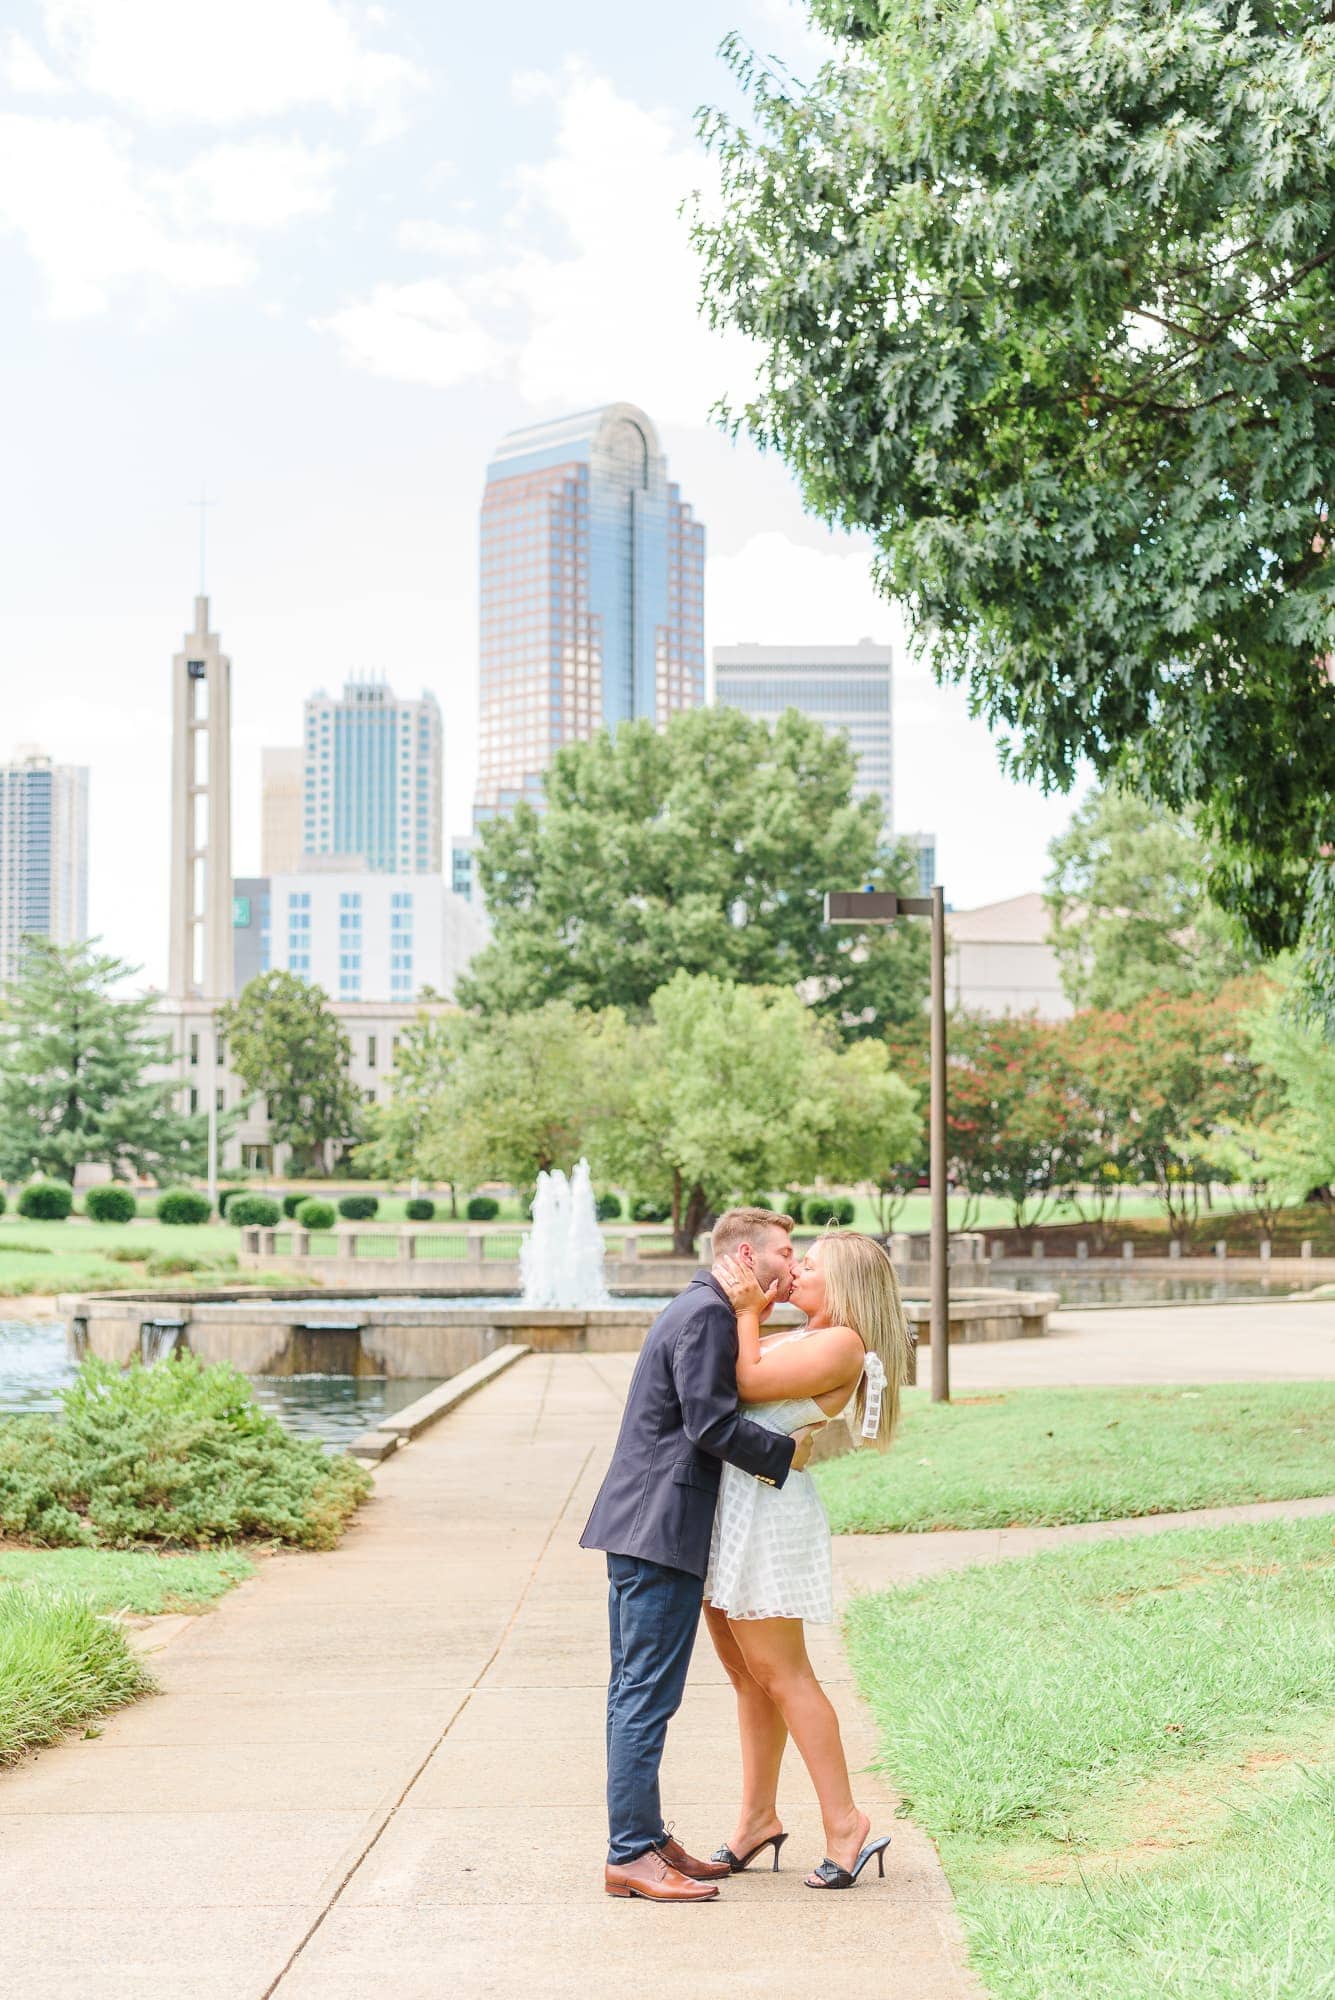 Marshall Park in Charlotte has a stunning view of the city skyline.